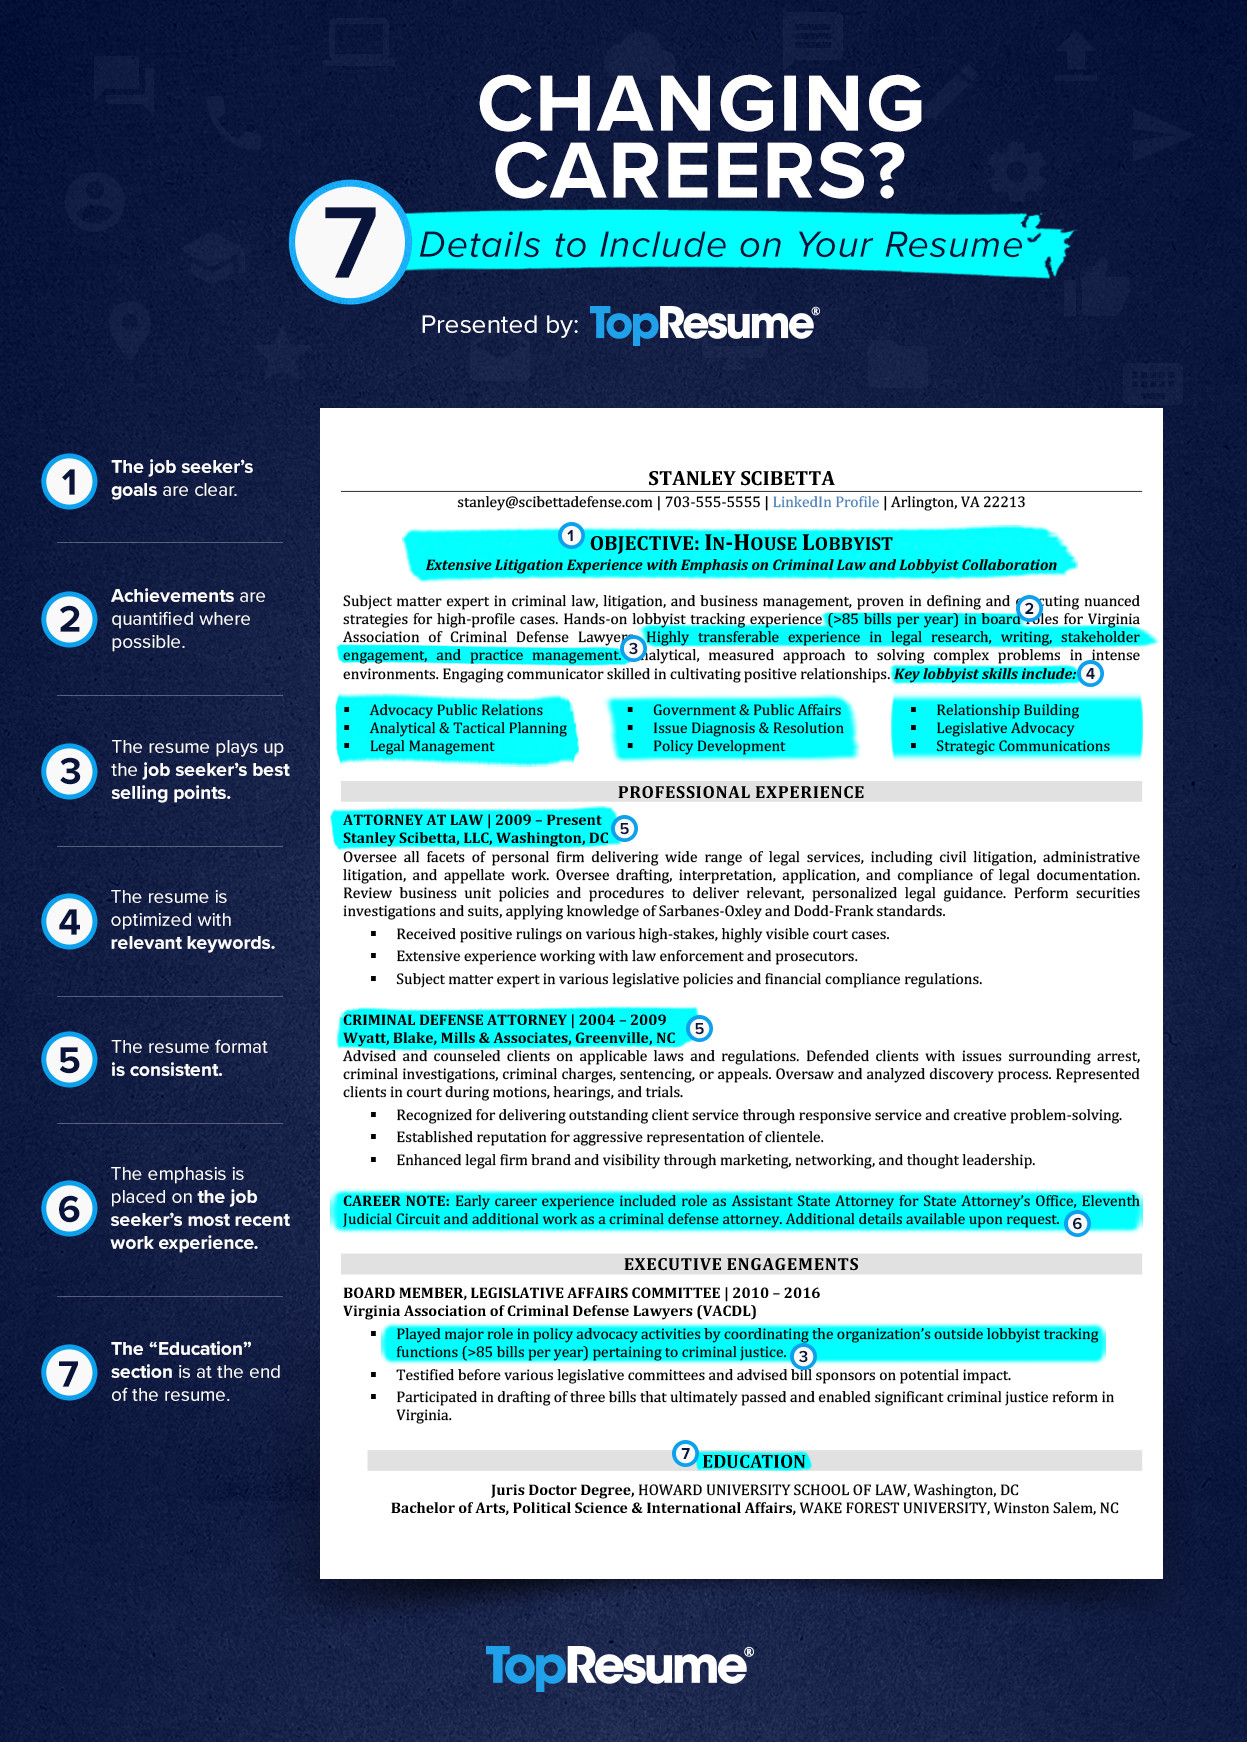 Sample Resume Shift Change Request form Changing Careers? 7 Details to Include On Your Resume topresume